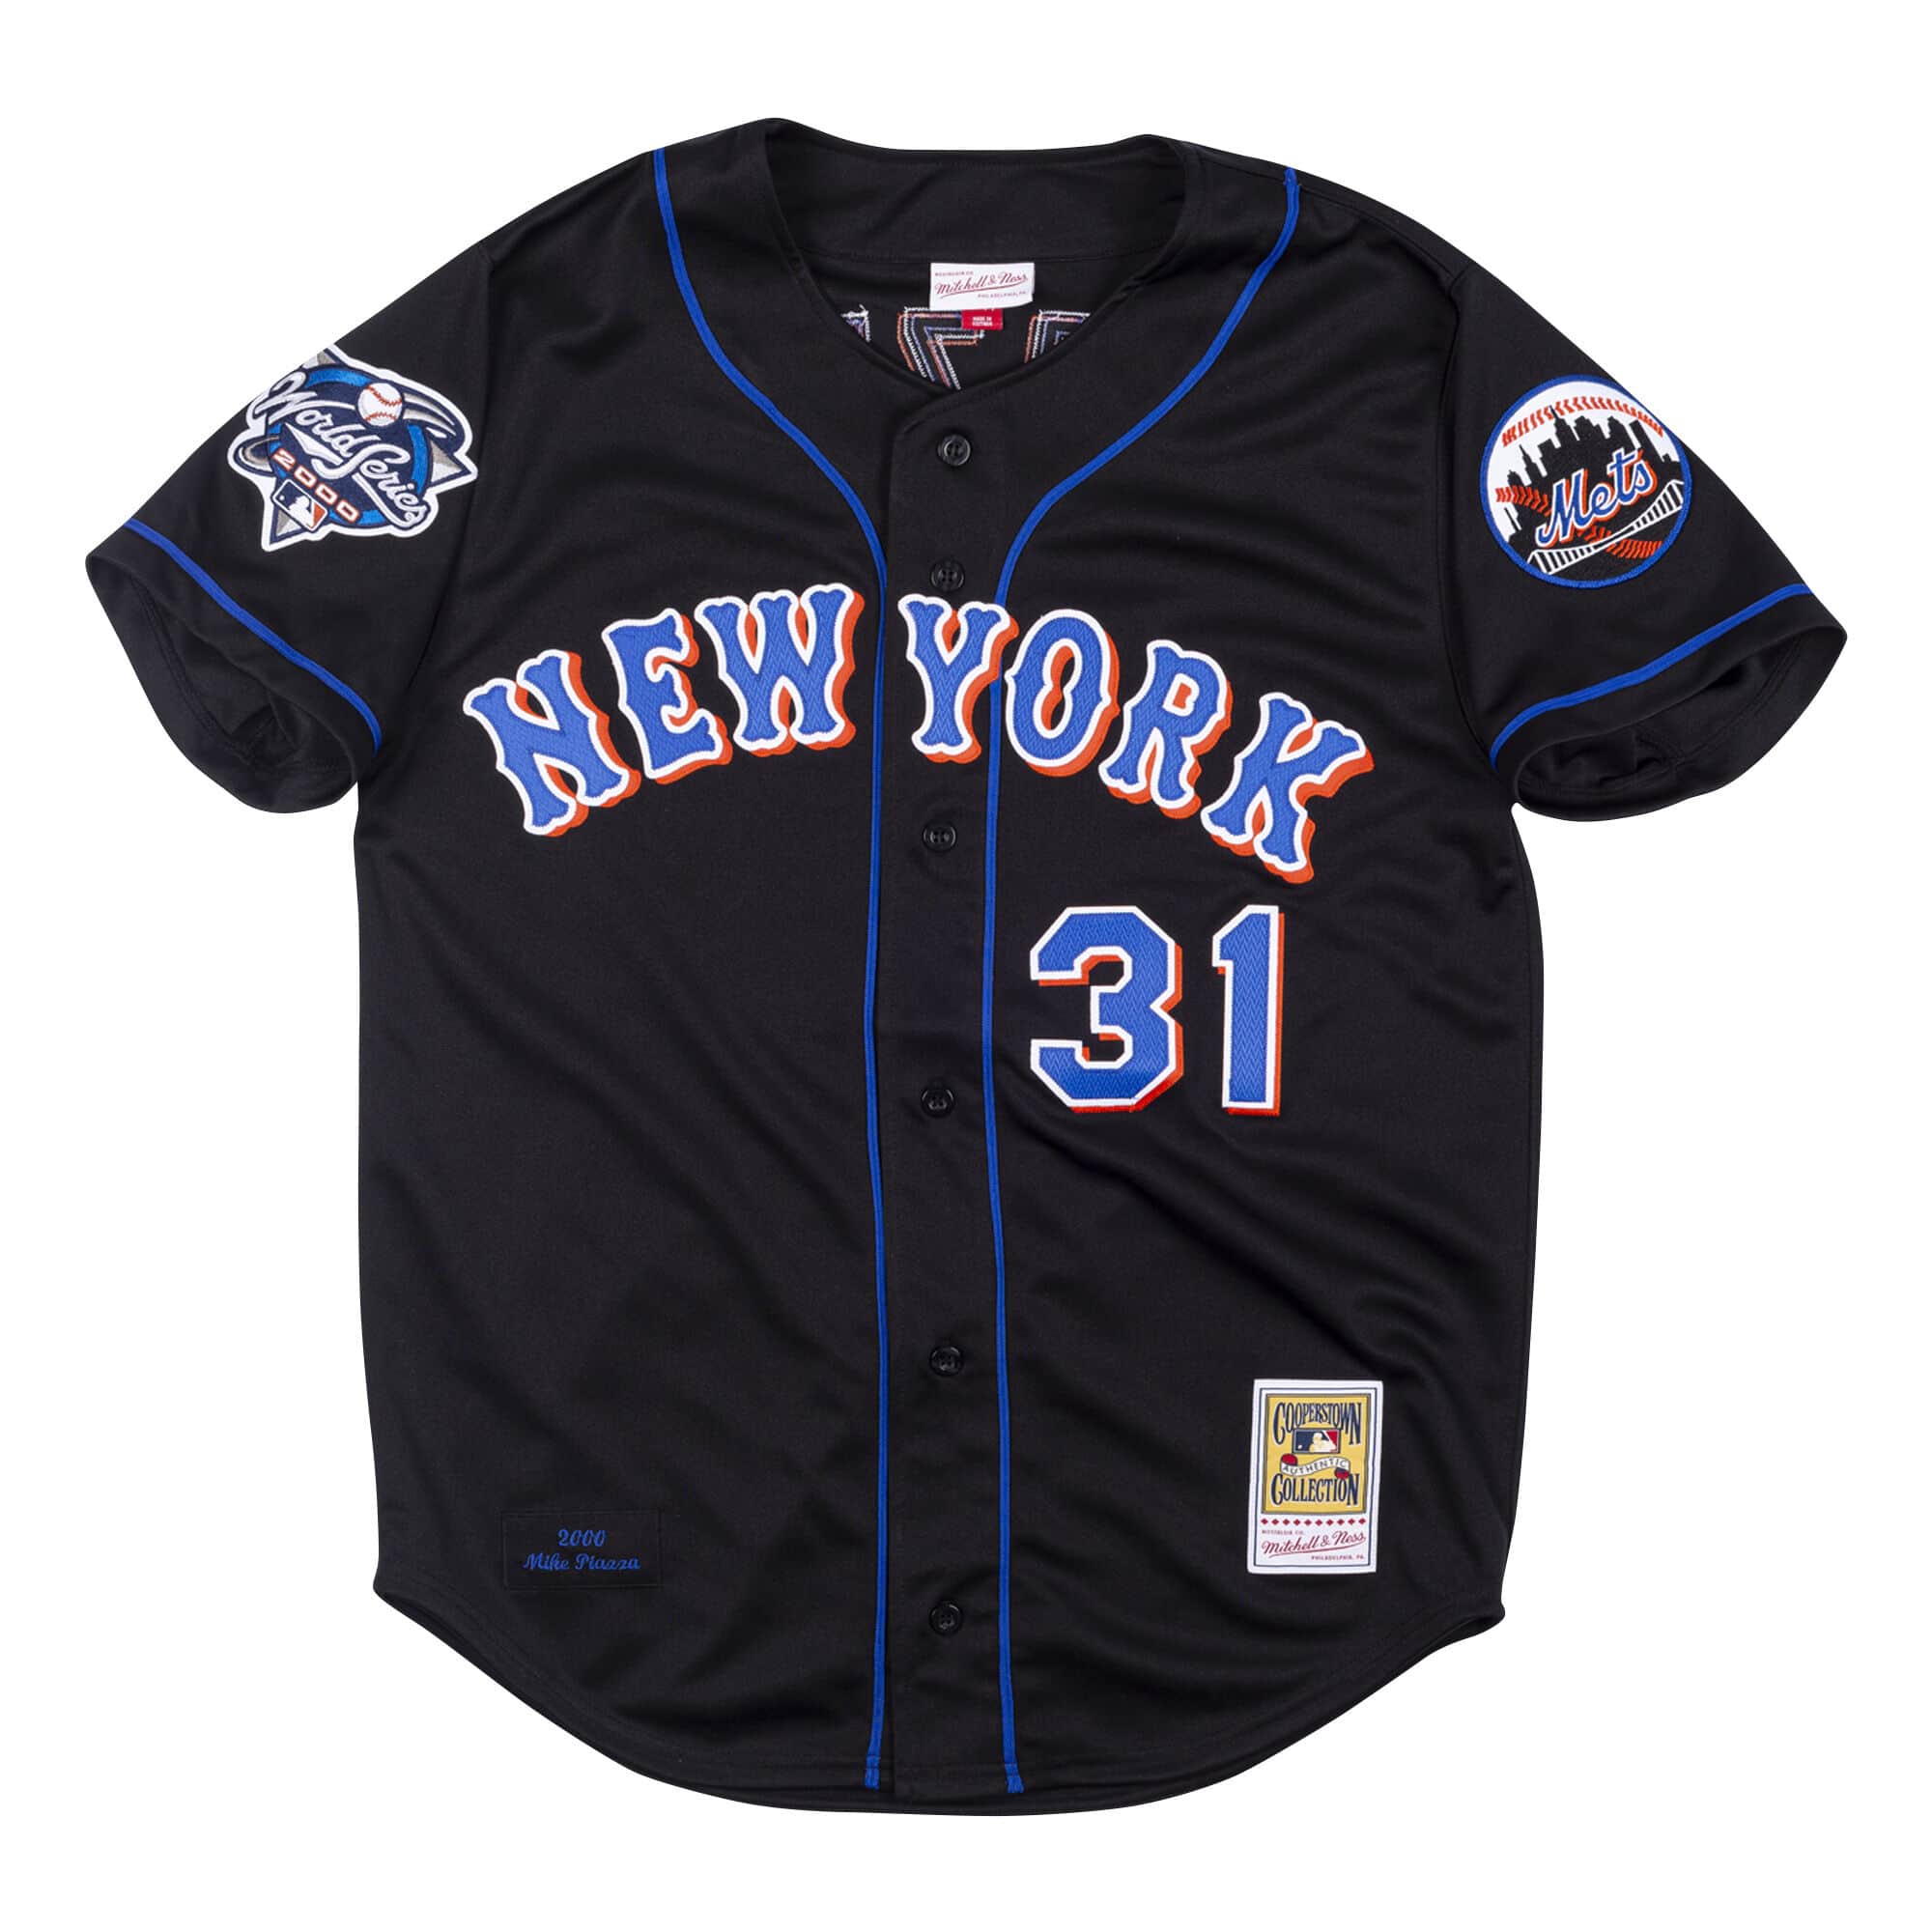 Authentic Mike Piazza New York Mets Home 2000 Jersey - Shop